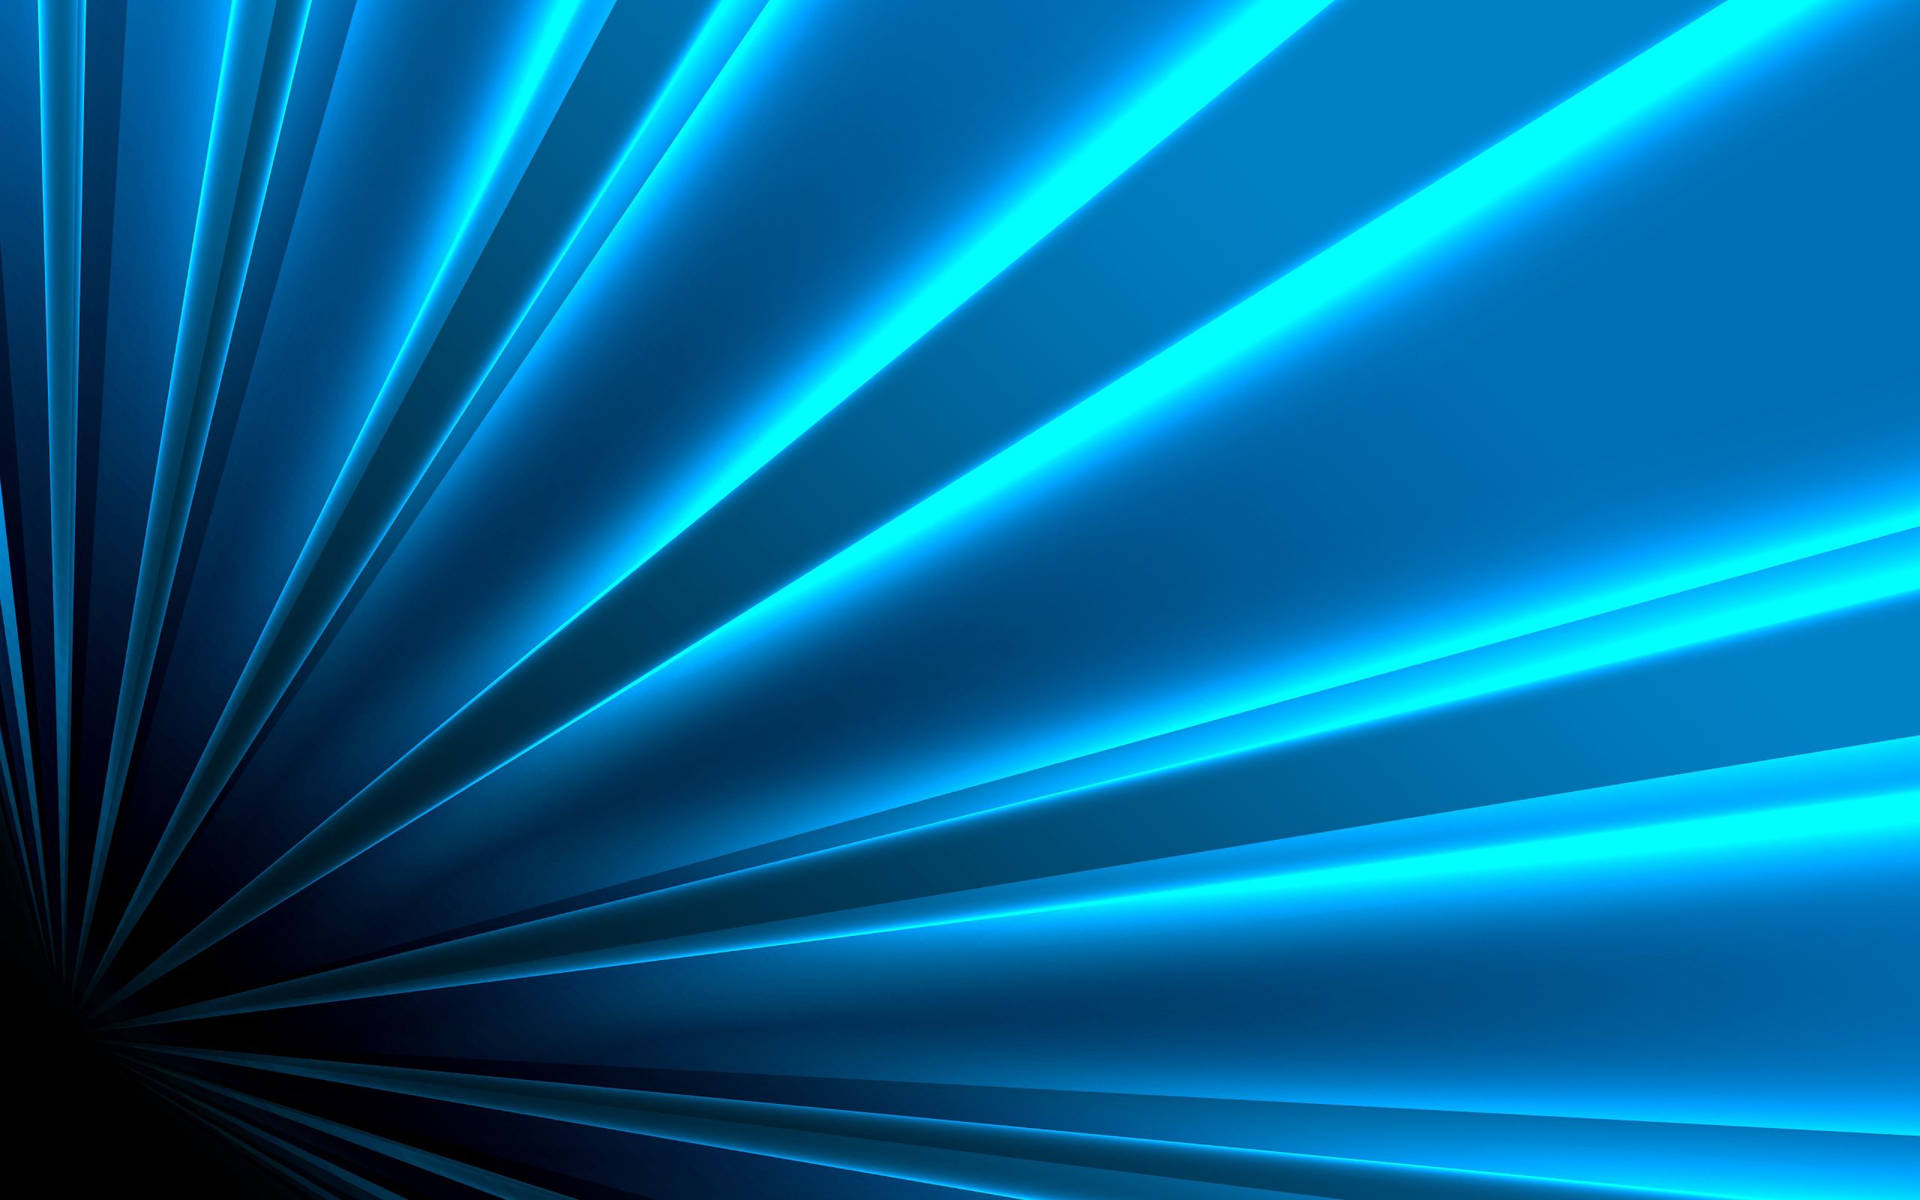 Glowing Blue Lines Blur into Abstract Art Wallpaper